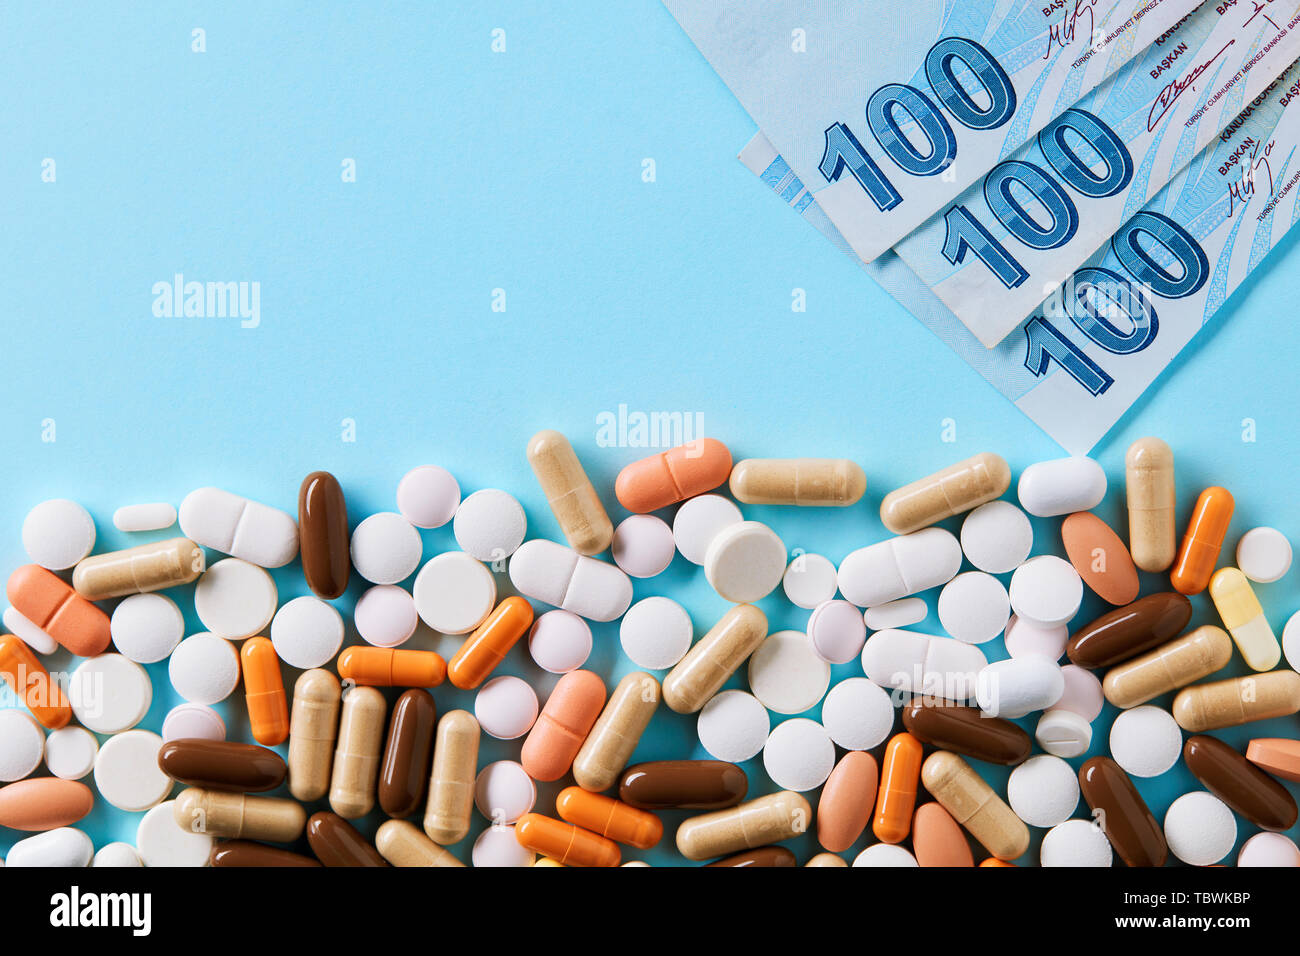 Hundred Turkish Lira bills over the medical pills. Expensive medicine and healthcare industry concept. Overhead macro view with copy space. Stock Photo